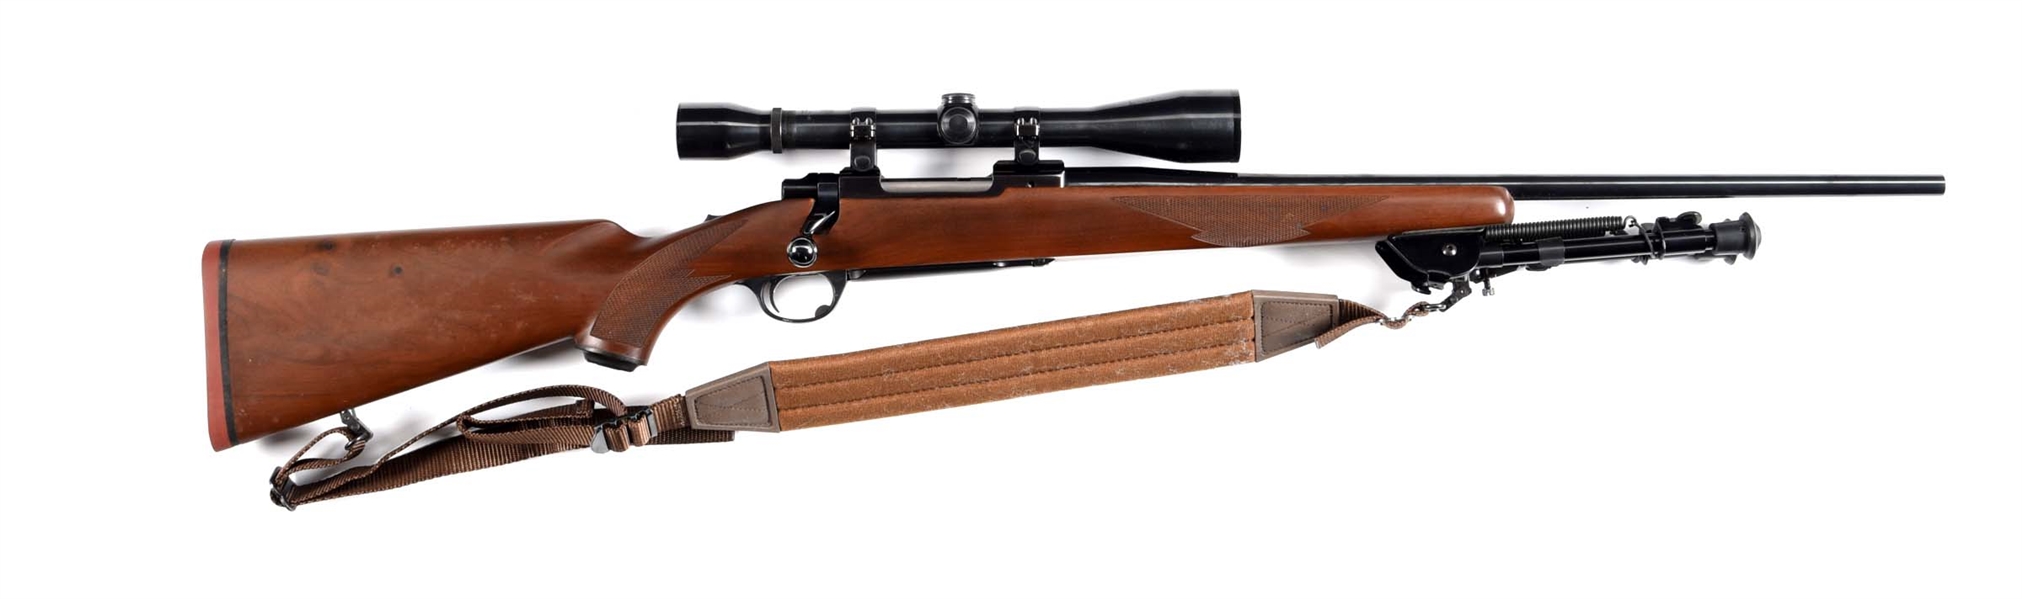 (M) RUGER M77 BOLT ACTION RIFLE IN .308 WINCHESTER.